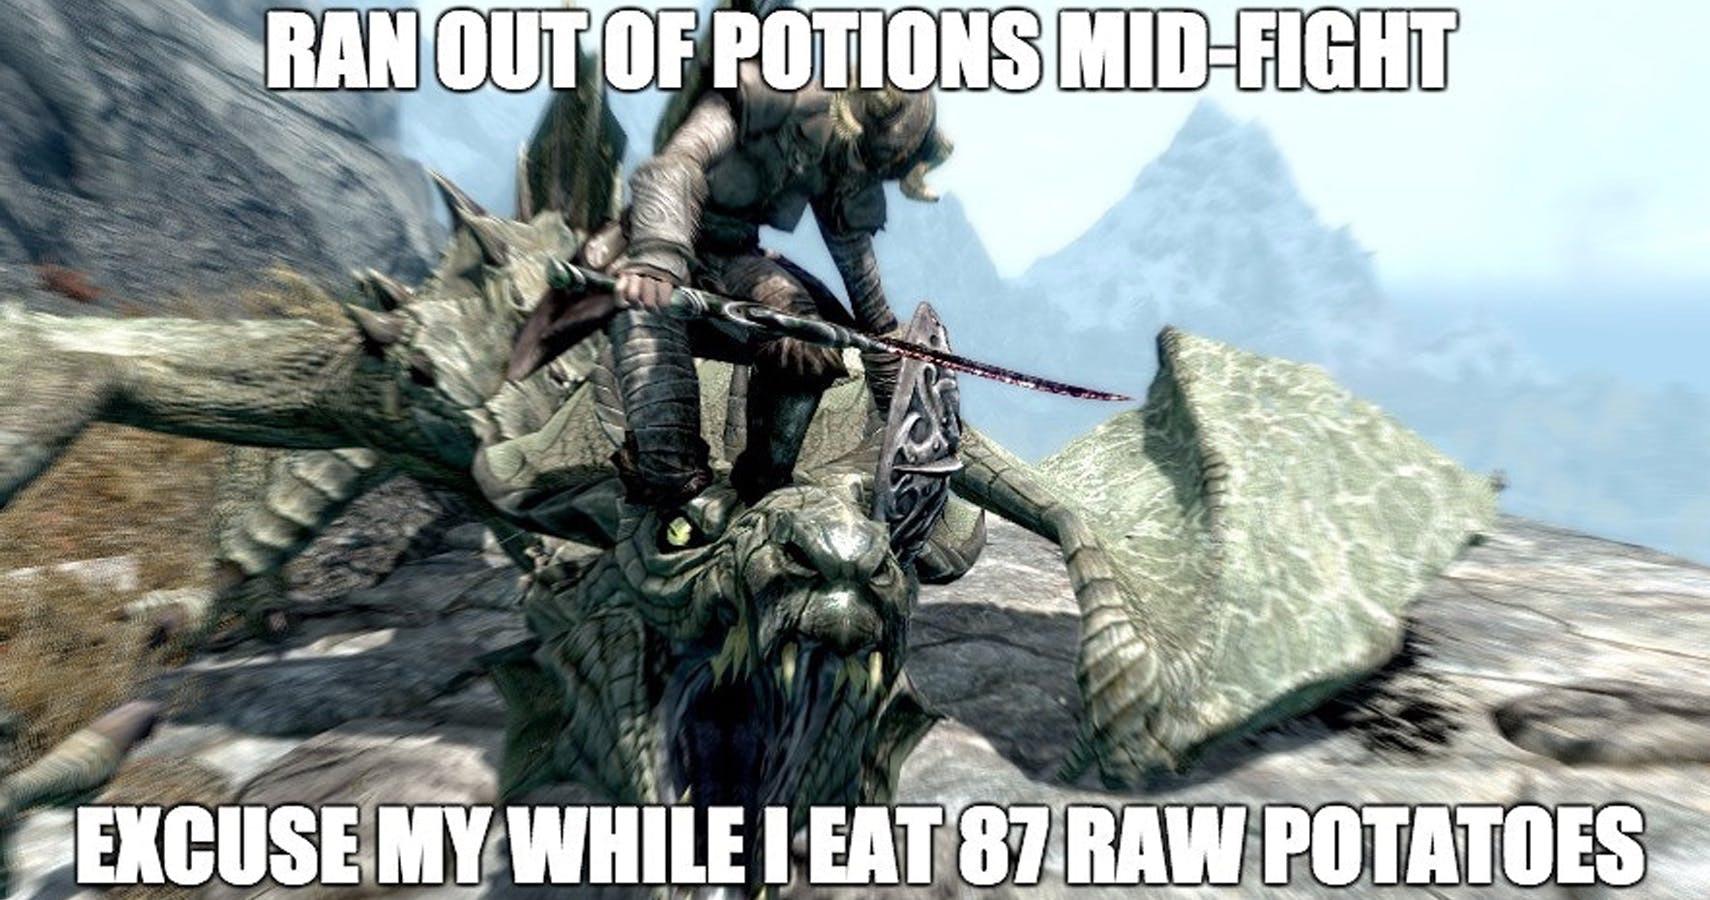 third world success kid - Ran Out Of Potions MidFight Excuse My While I Eat 87 Raw Potatoes